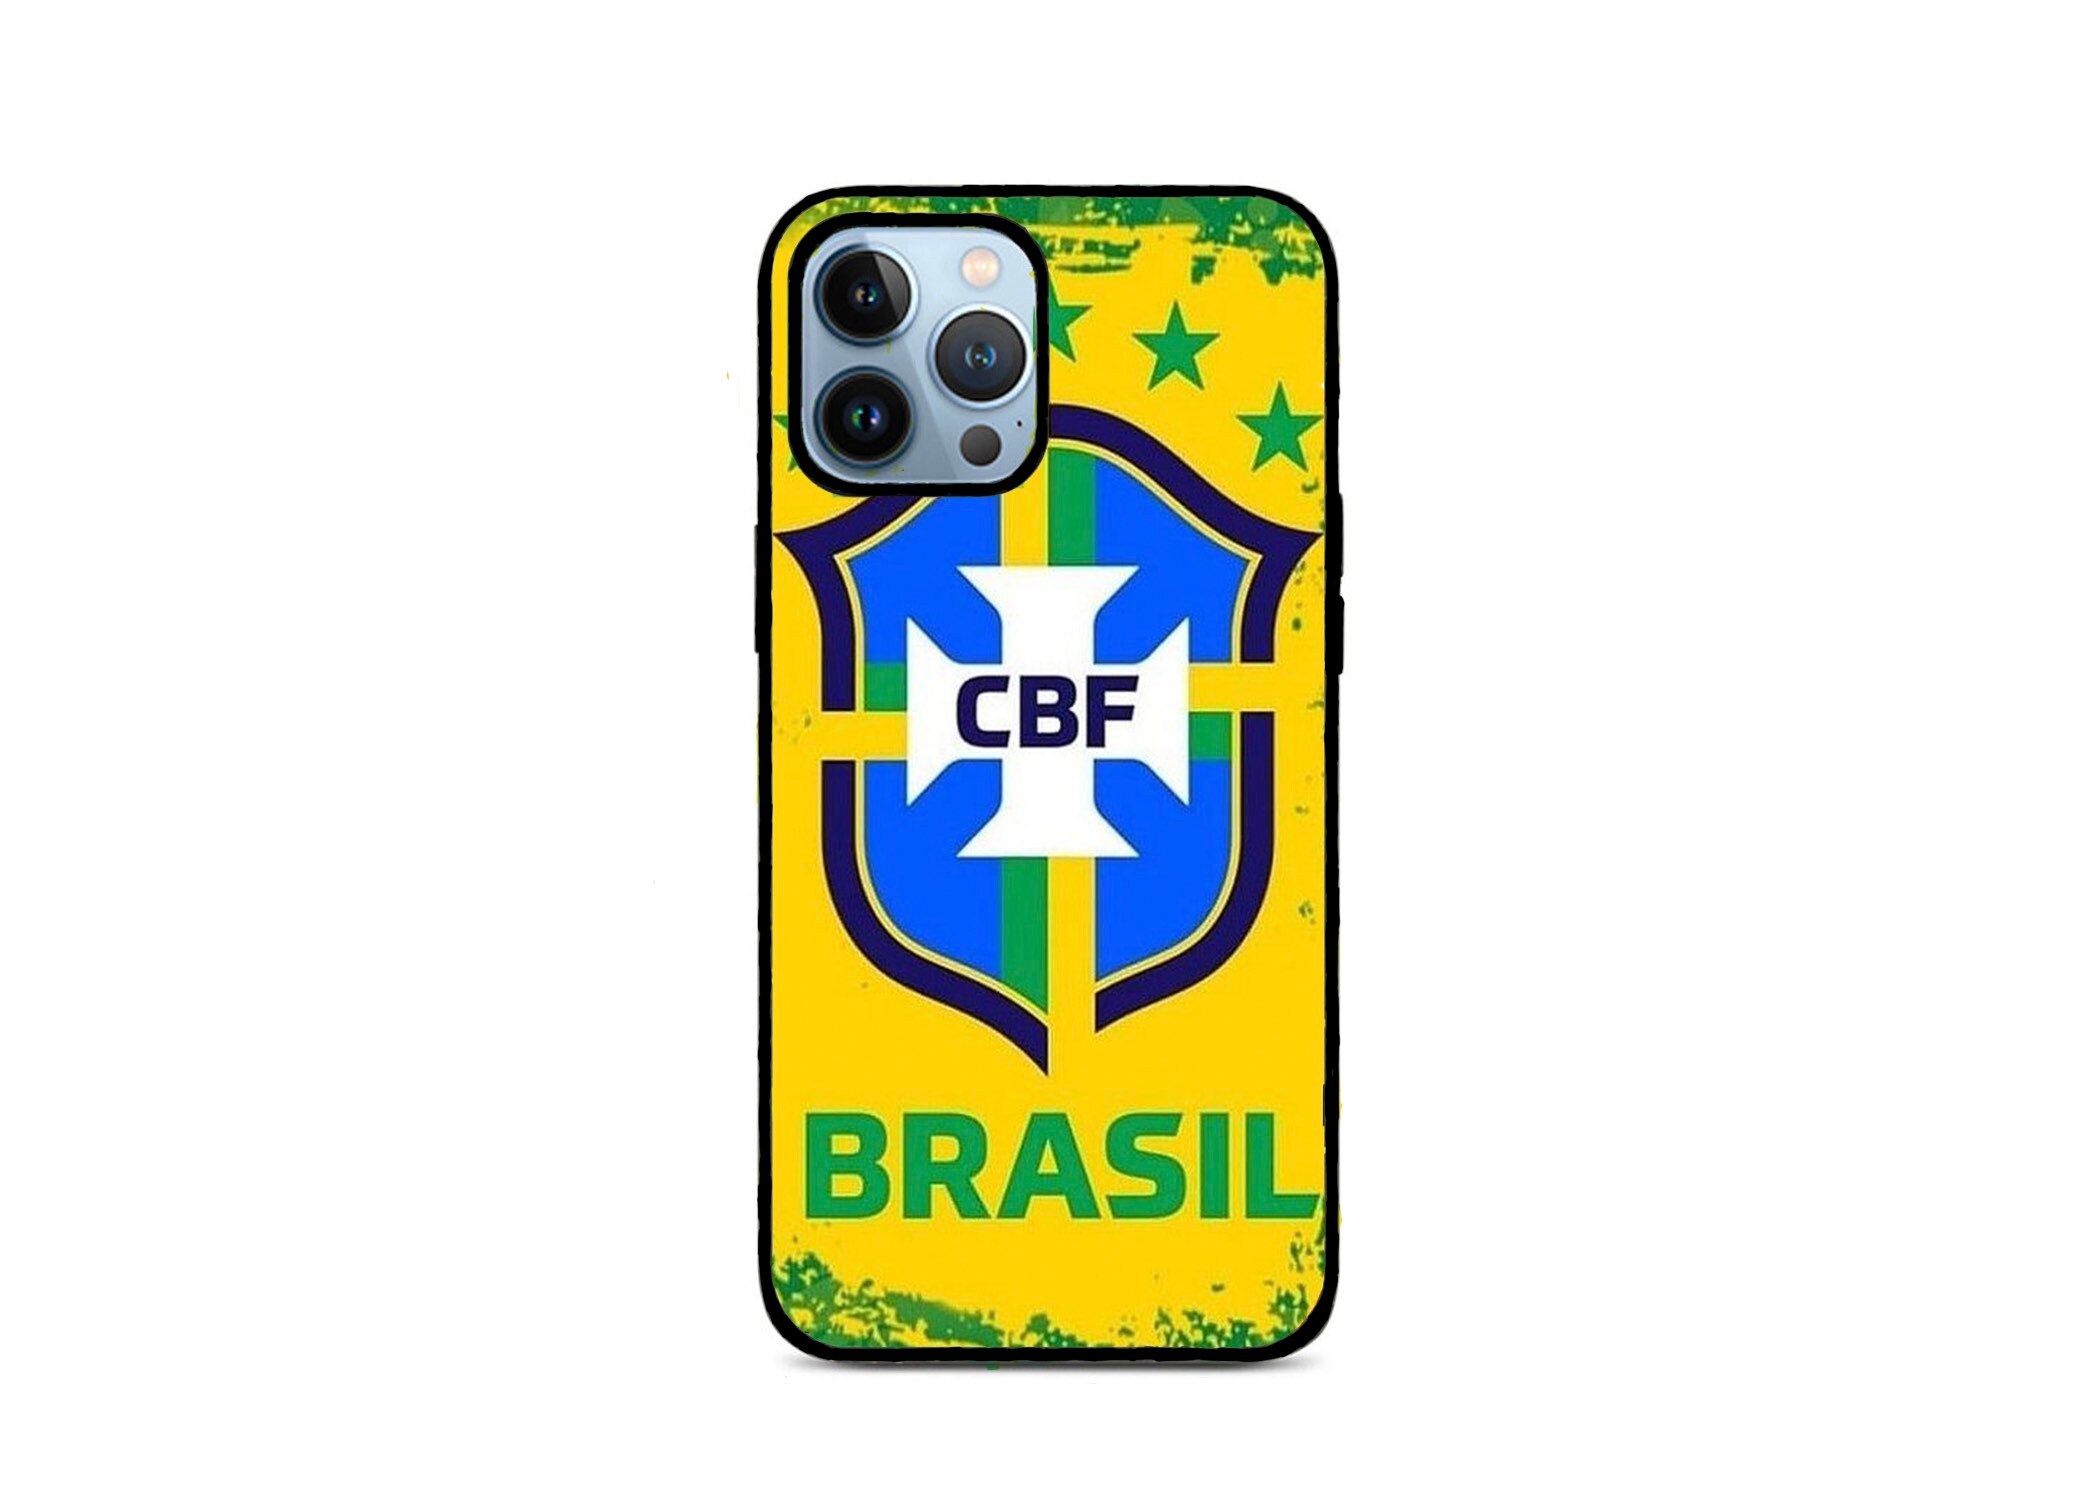 Brazil Soccer Team For Iphone 14, Iphone 13, Iphone 12 & Iphone 11 Models Iphone Case Cover World Cup Fk-44399-1